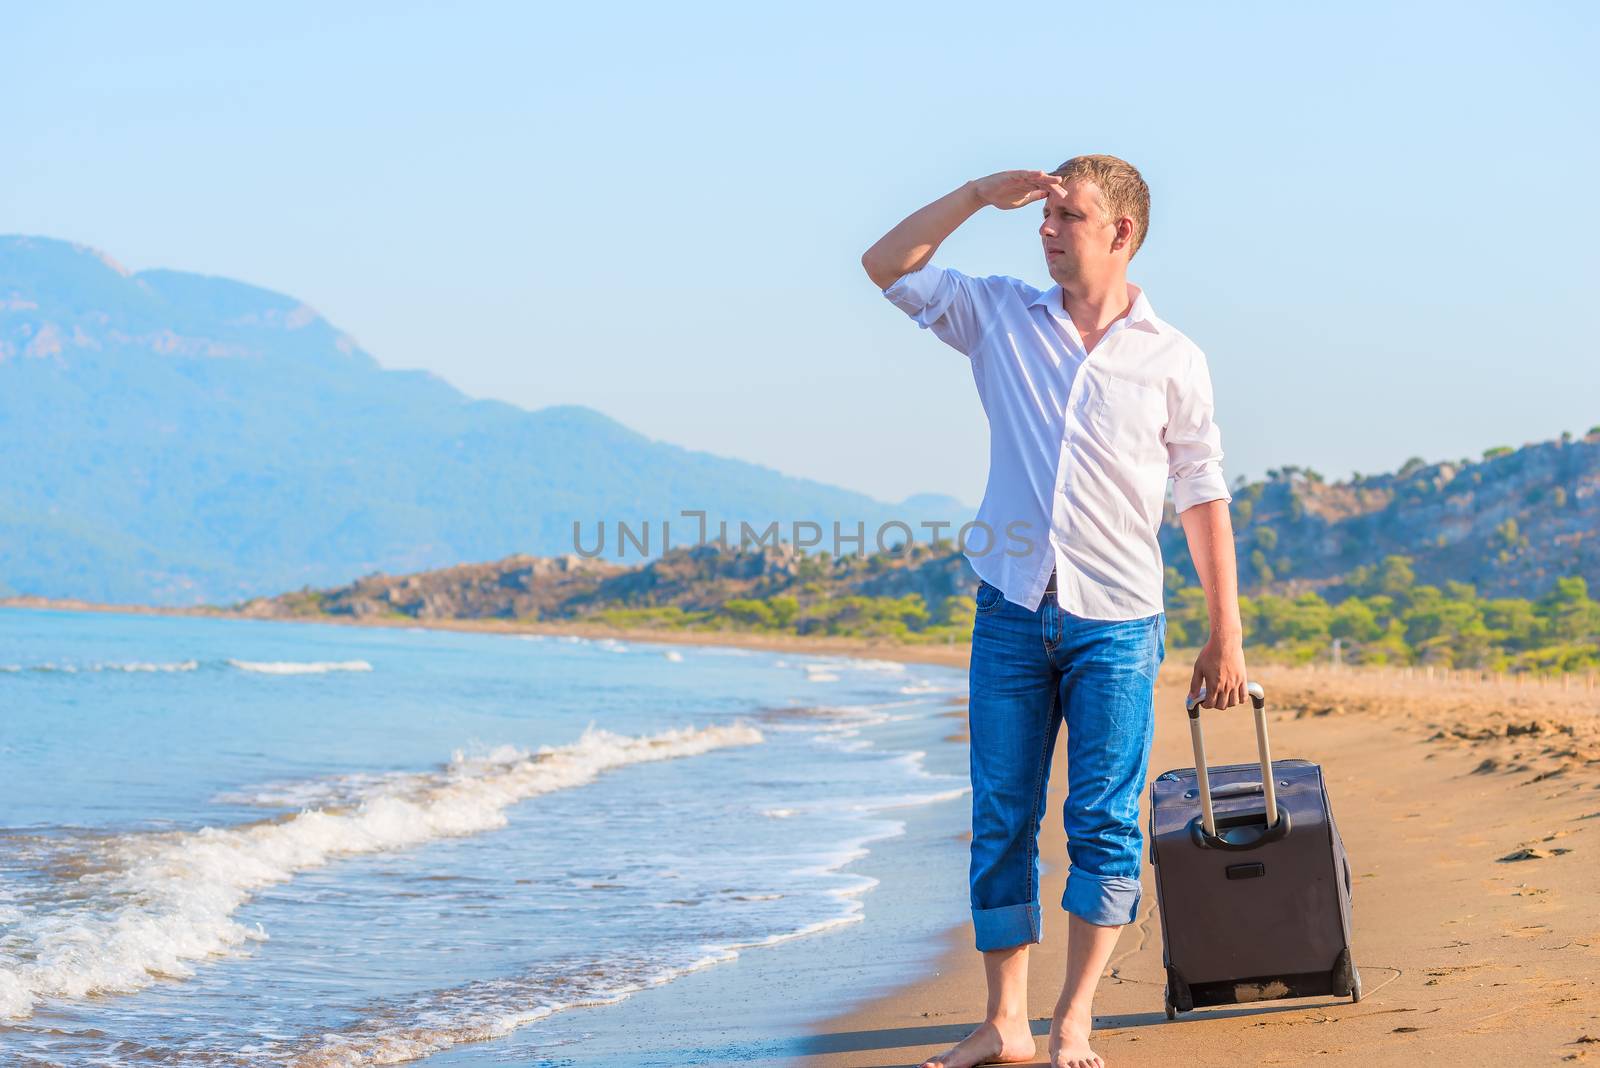 successful businessman on a desert island with a suitcase